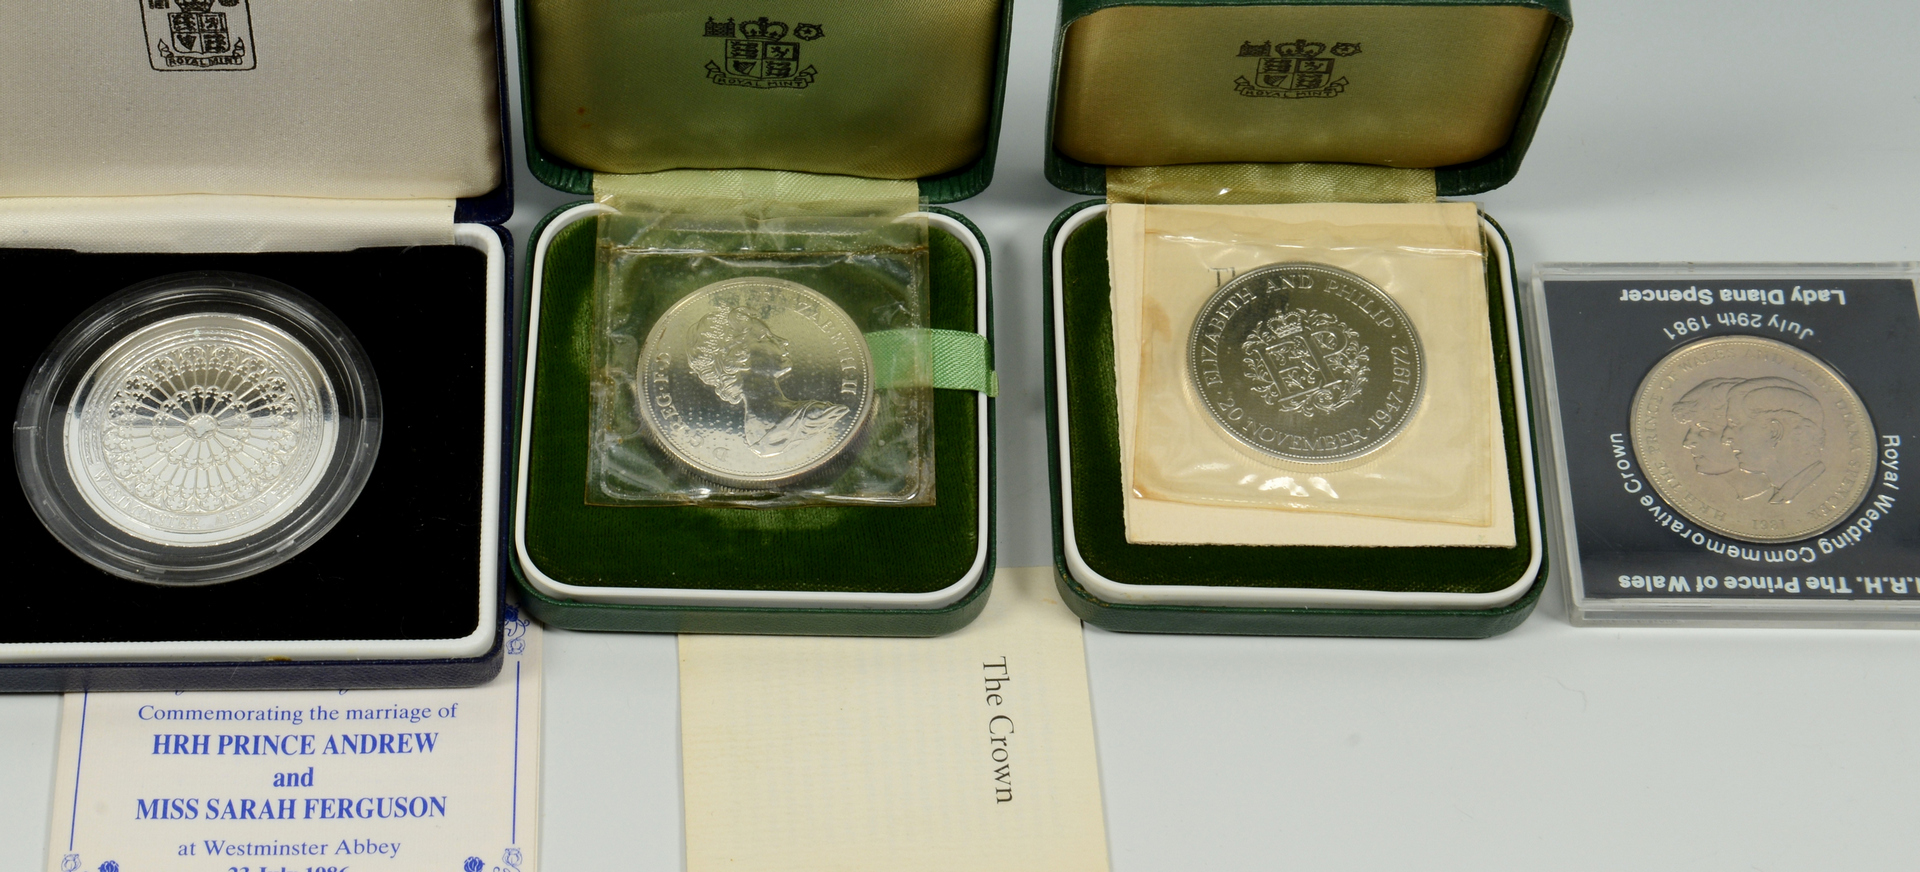 Lot 3088303: Grouping of UK Commemorative Coins & Medals